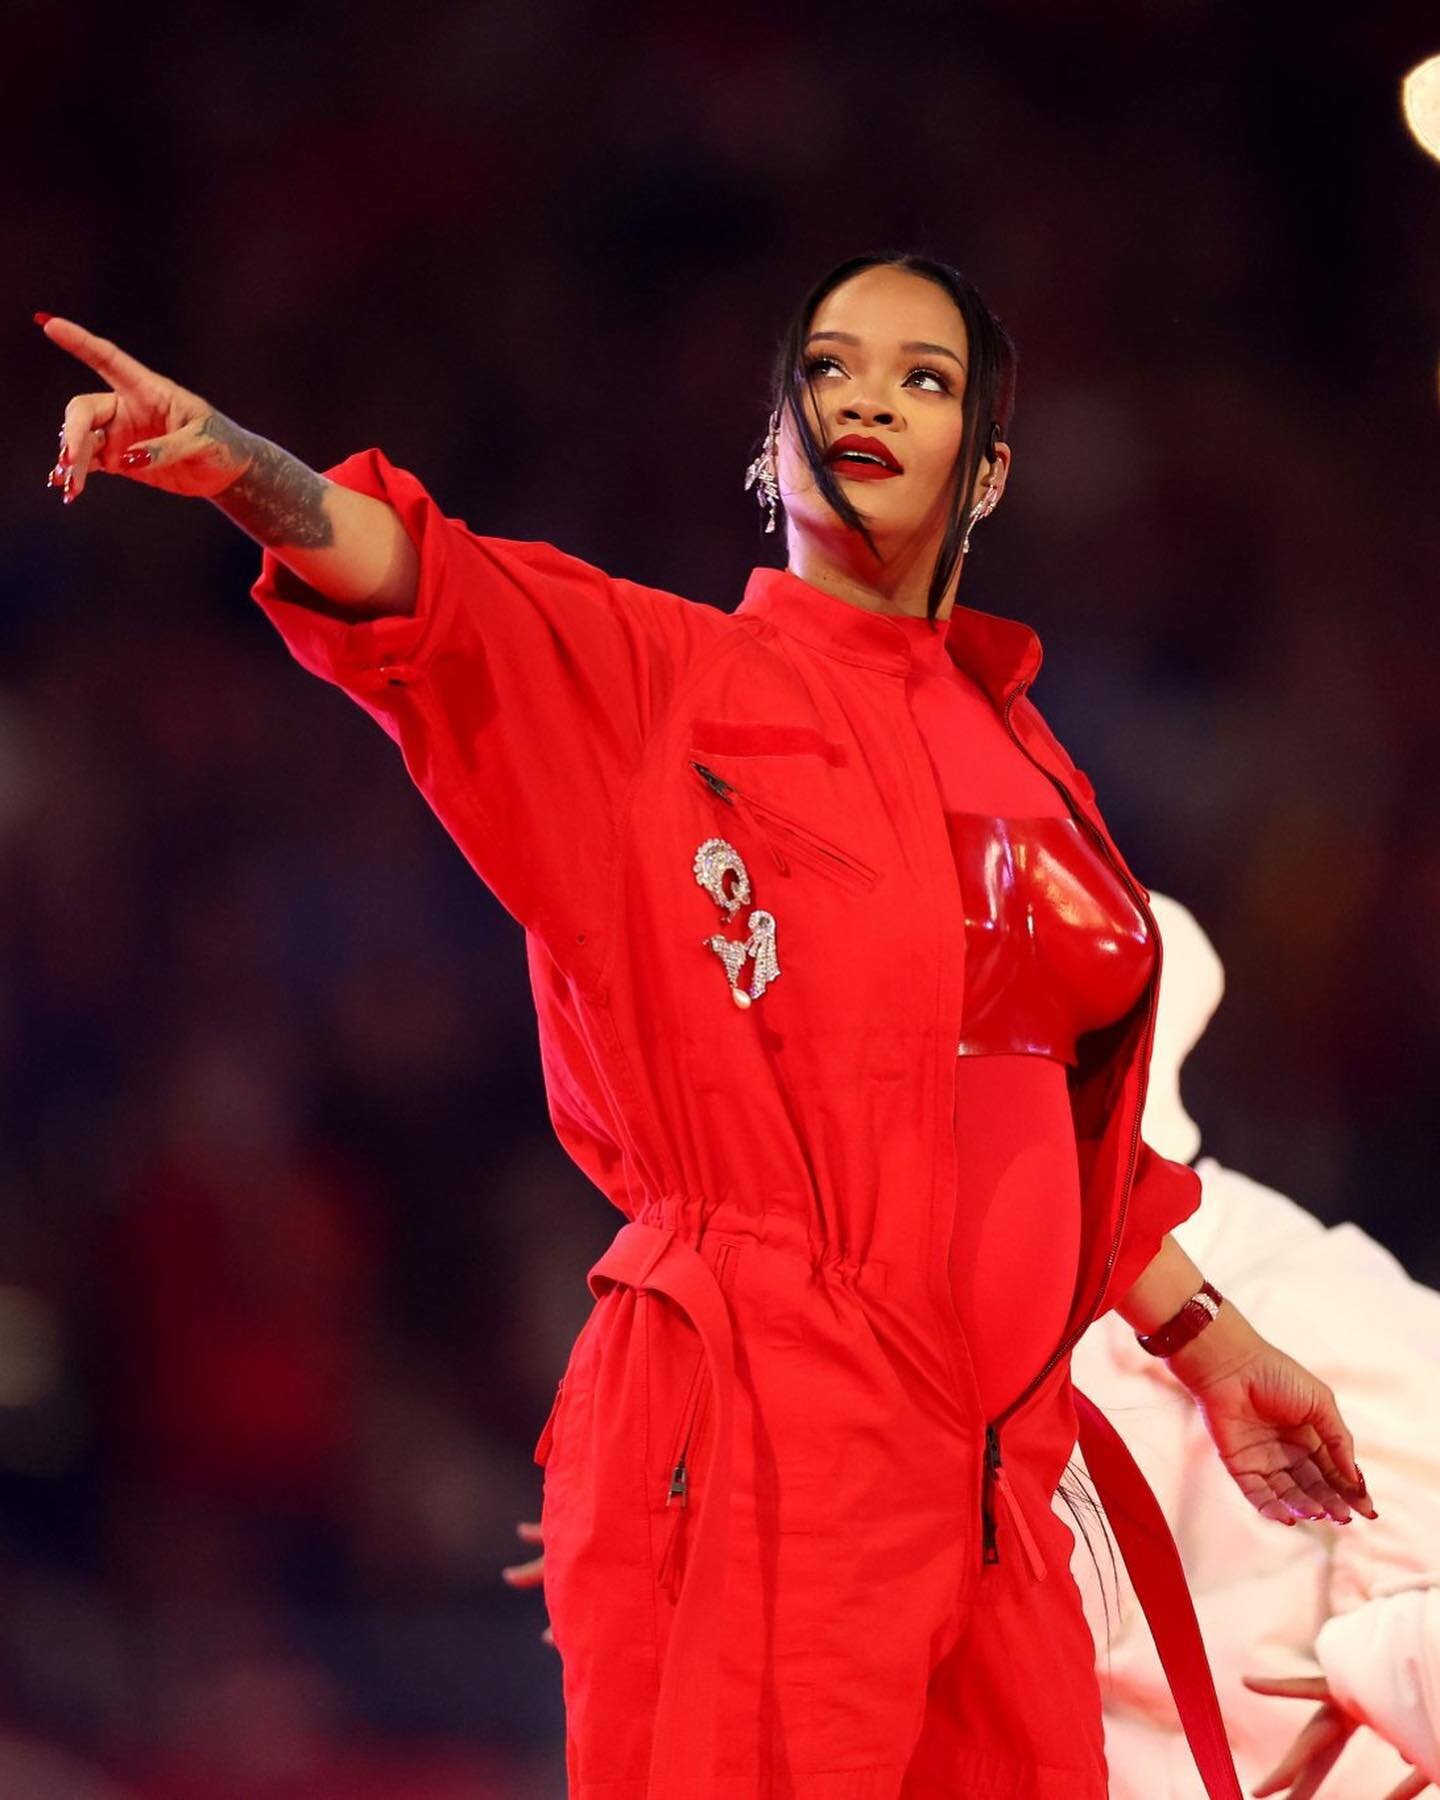 Thanks to @NPR having me on one of my favorite shows @hereandnow to discuss Rihanna&rsquo;s Super Bowl Halftime performance!

I talked about why it didn&rsquo;t feel like a Superbowl show&mdash; it felt like a Rihanna show, and why that&rsquo;s a goo